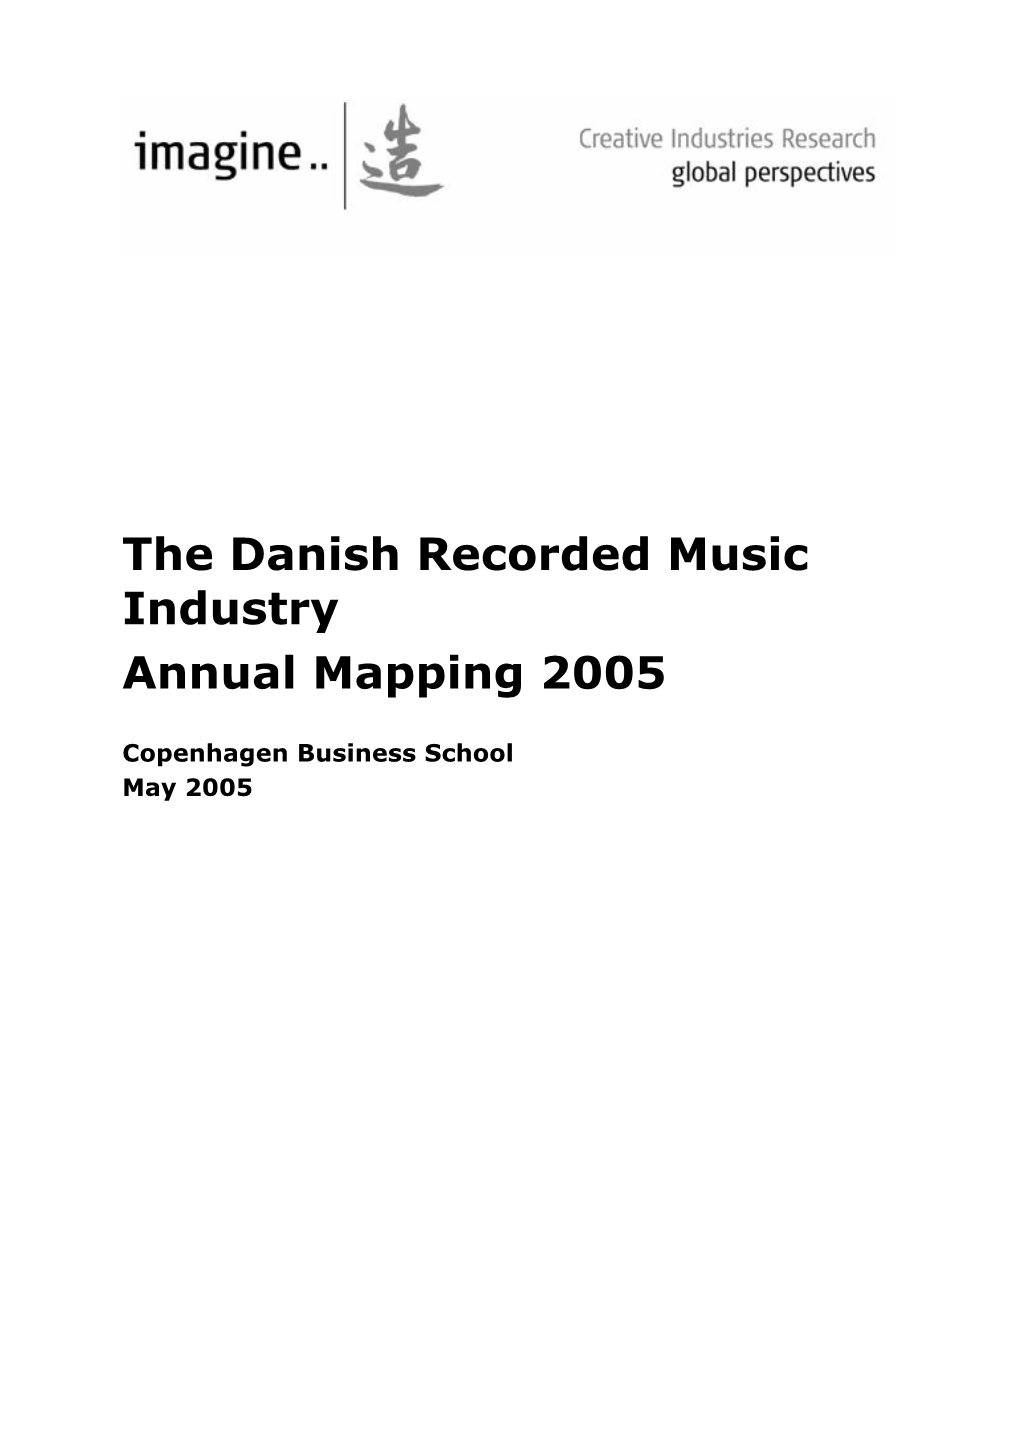 The Danish Recorded Music Industry Annual Mapping 2005